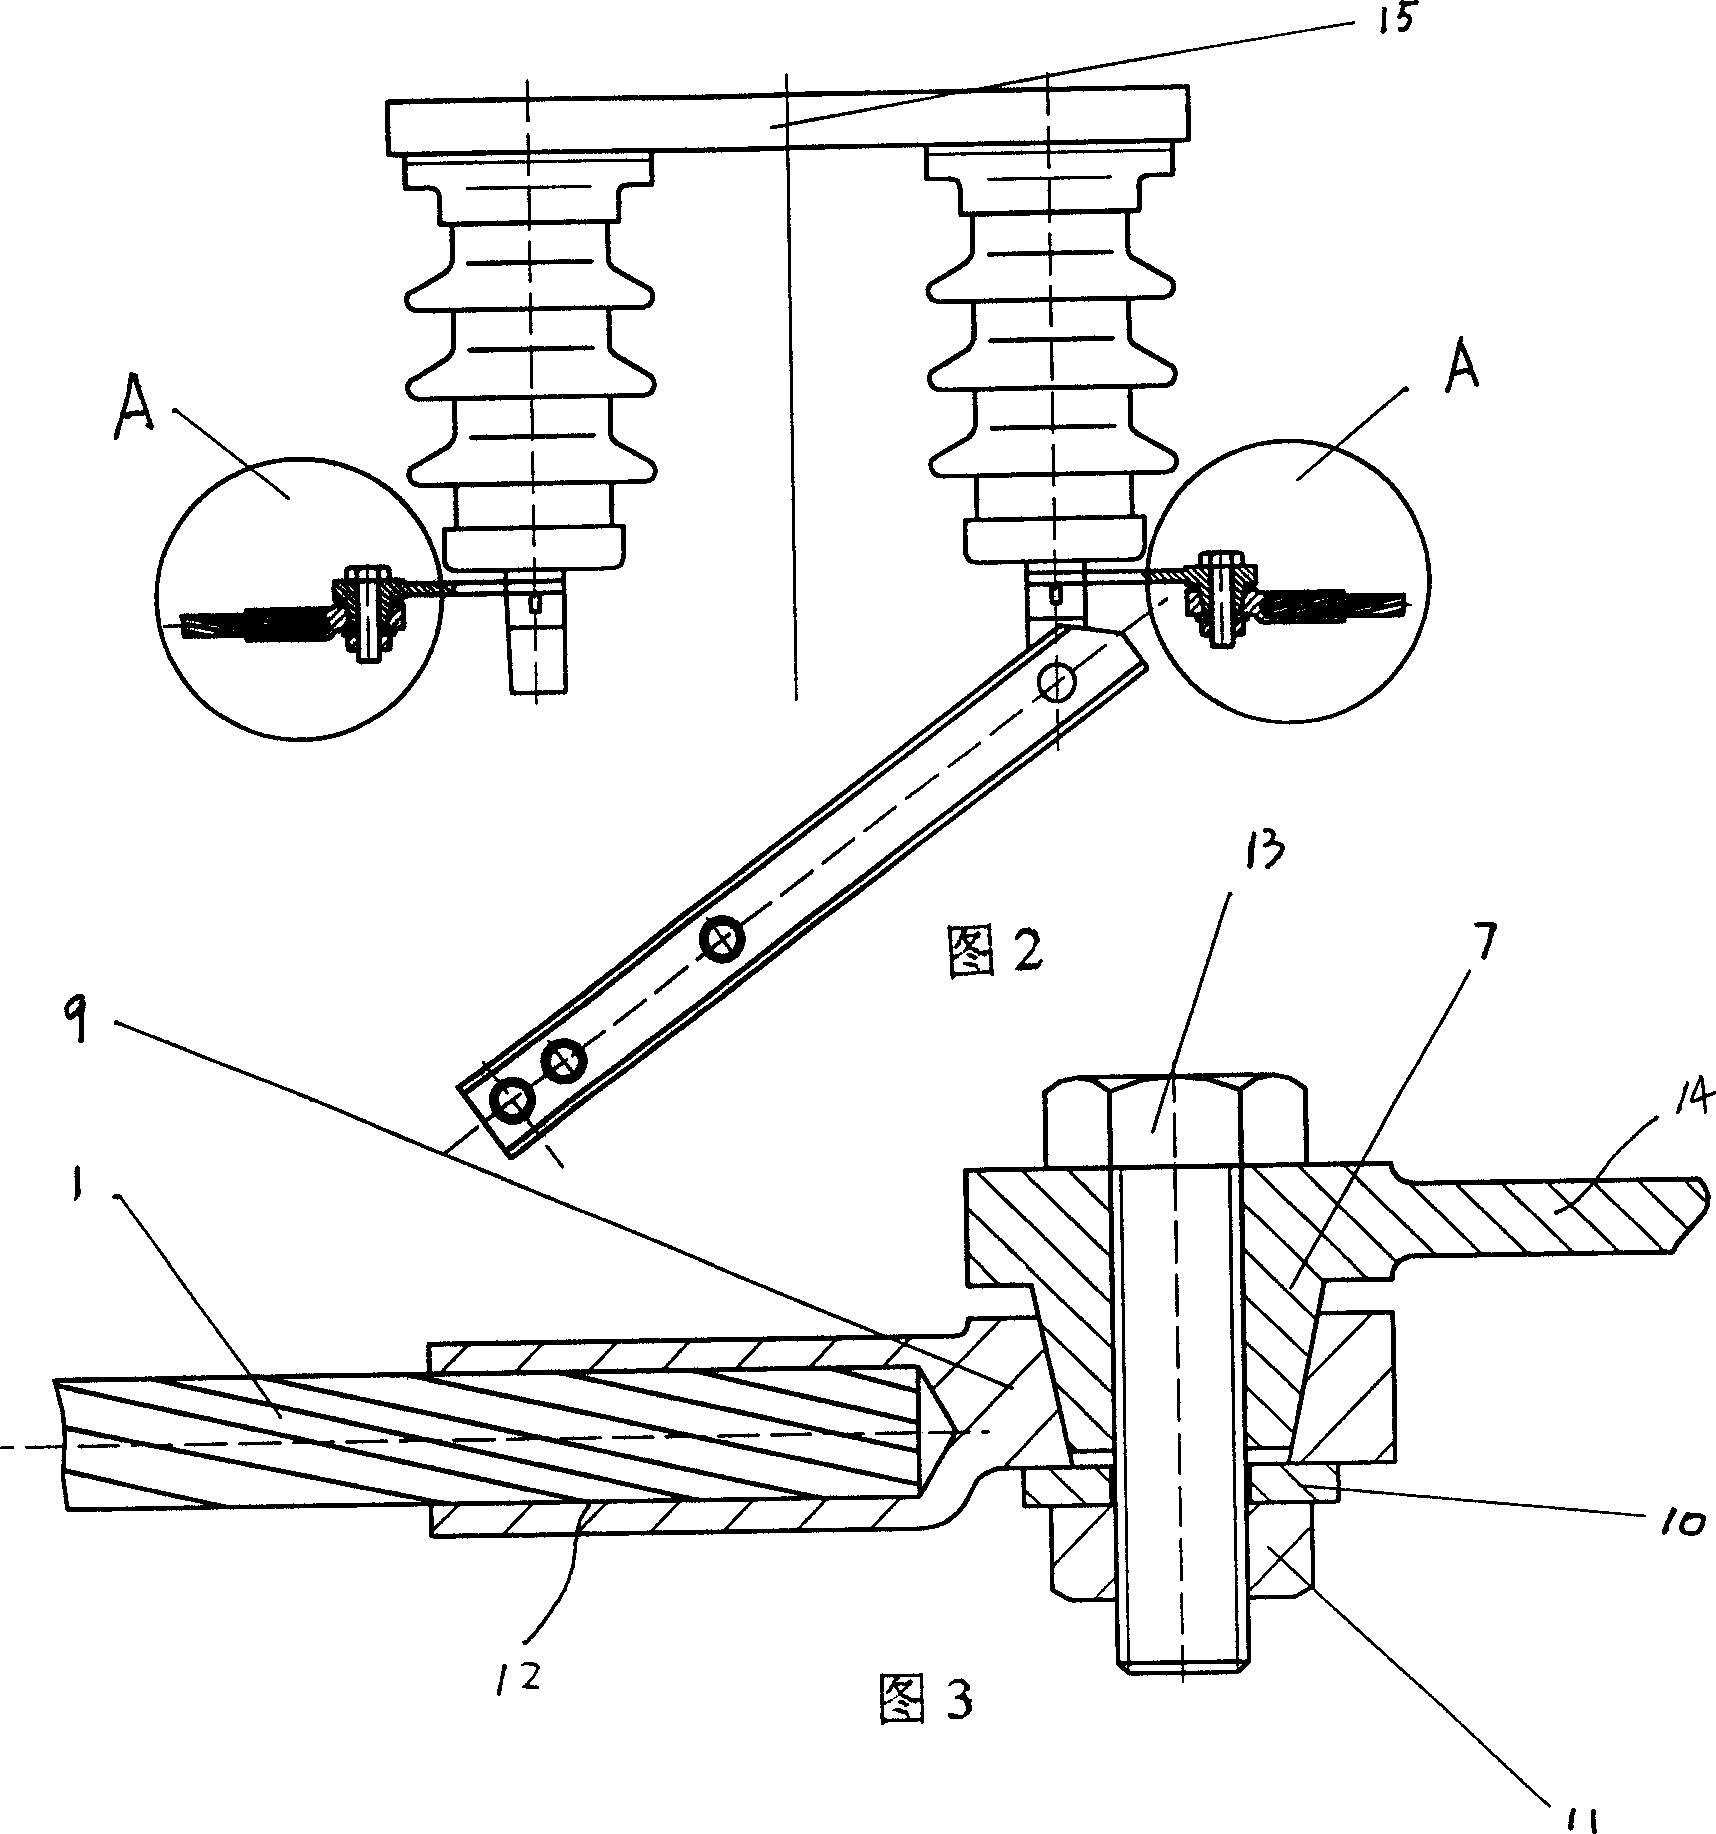 A conical surface electrical connection technique